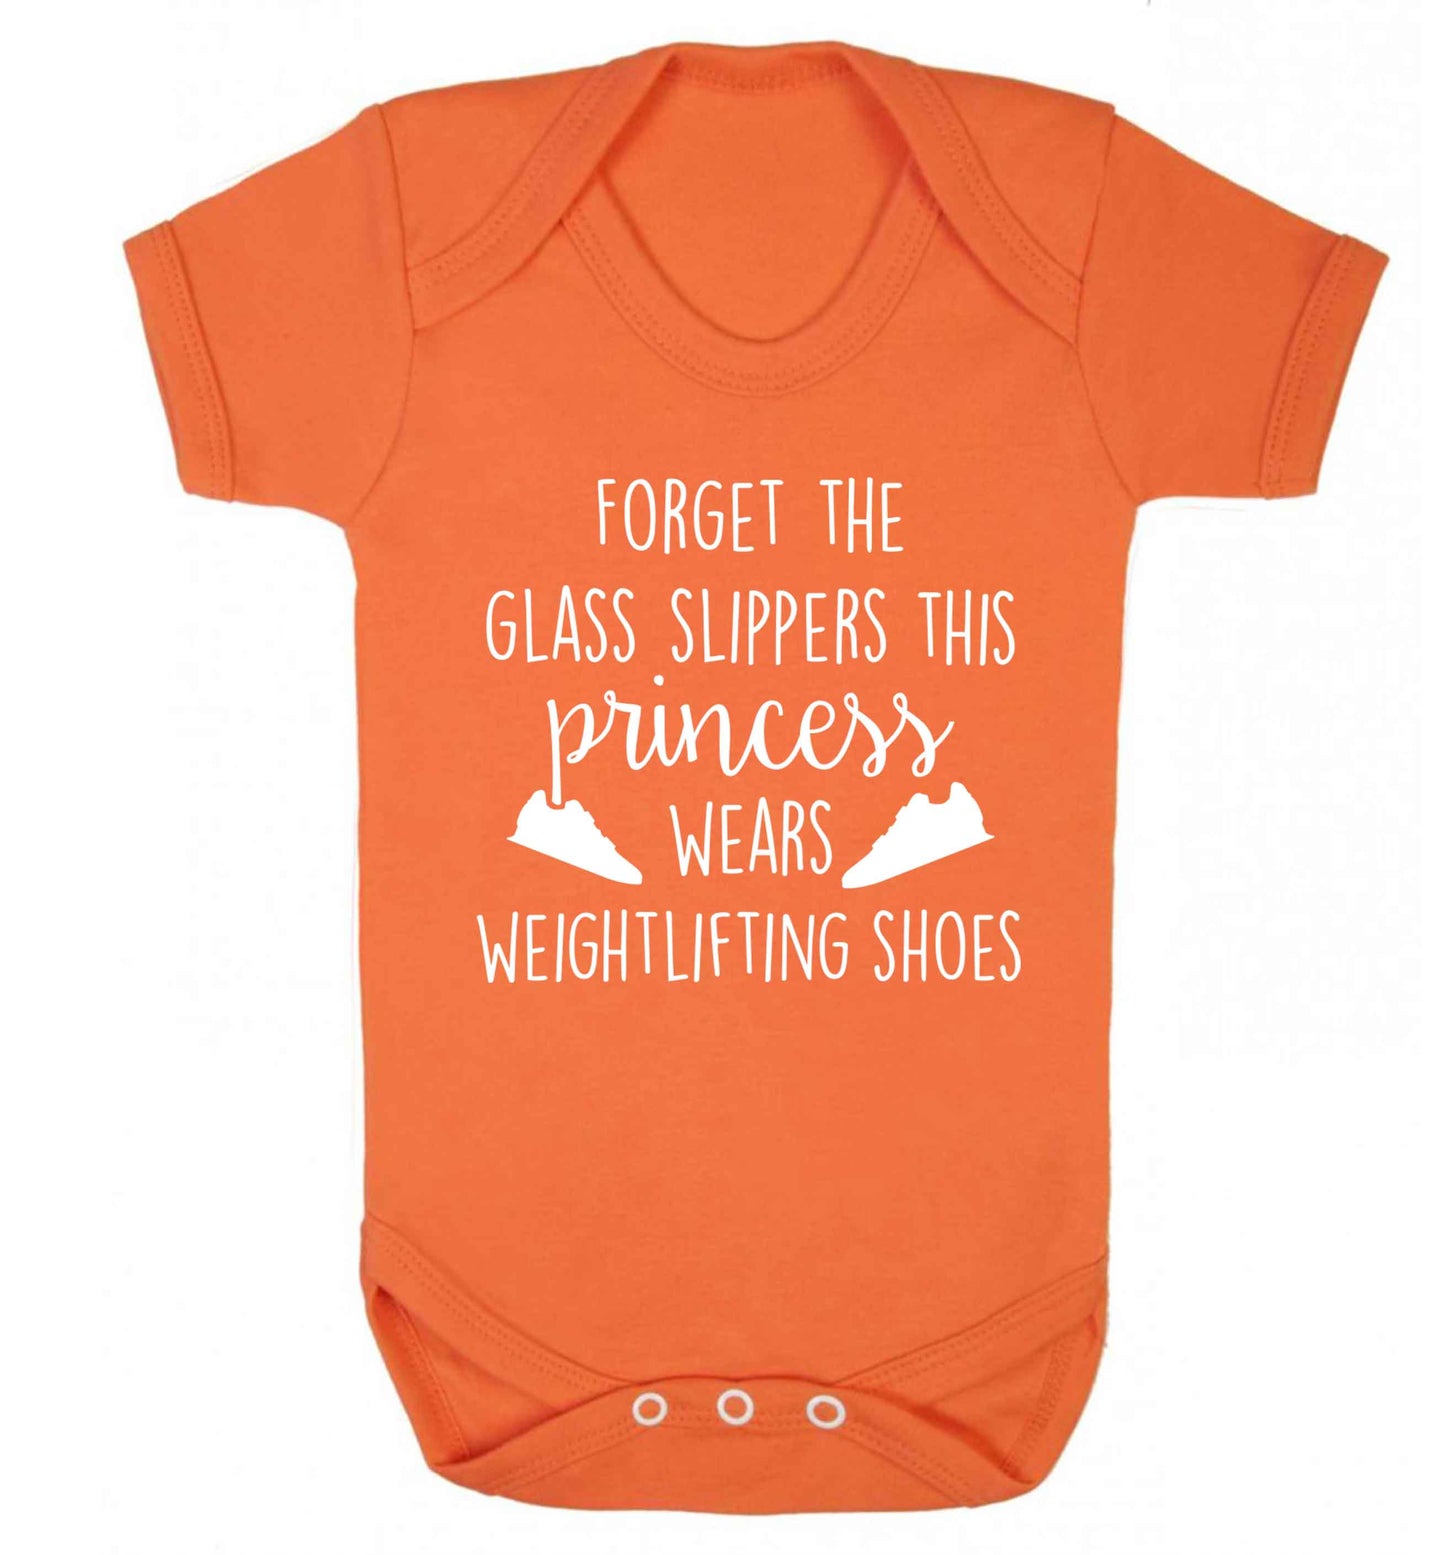 Forget the glass slippers this princess wears weightlifting shoes Baby Vest orange 18-24 months